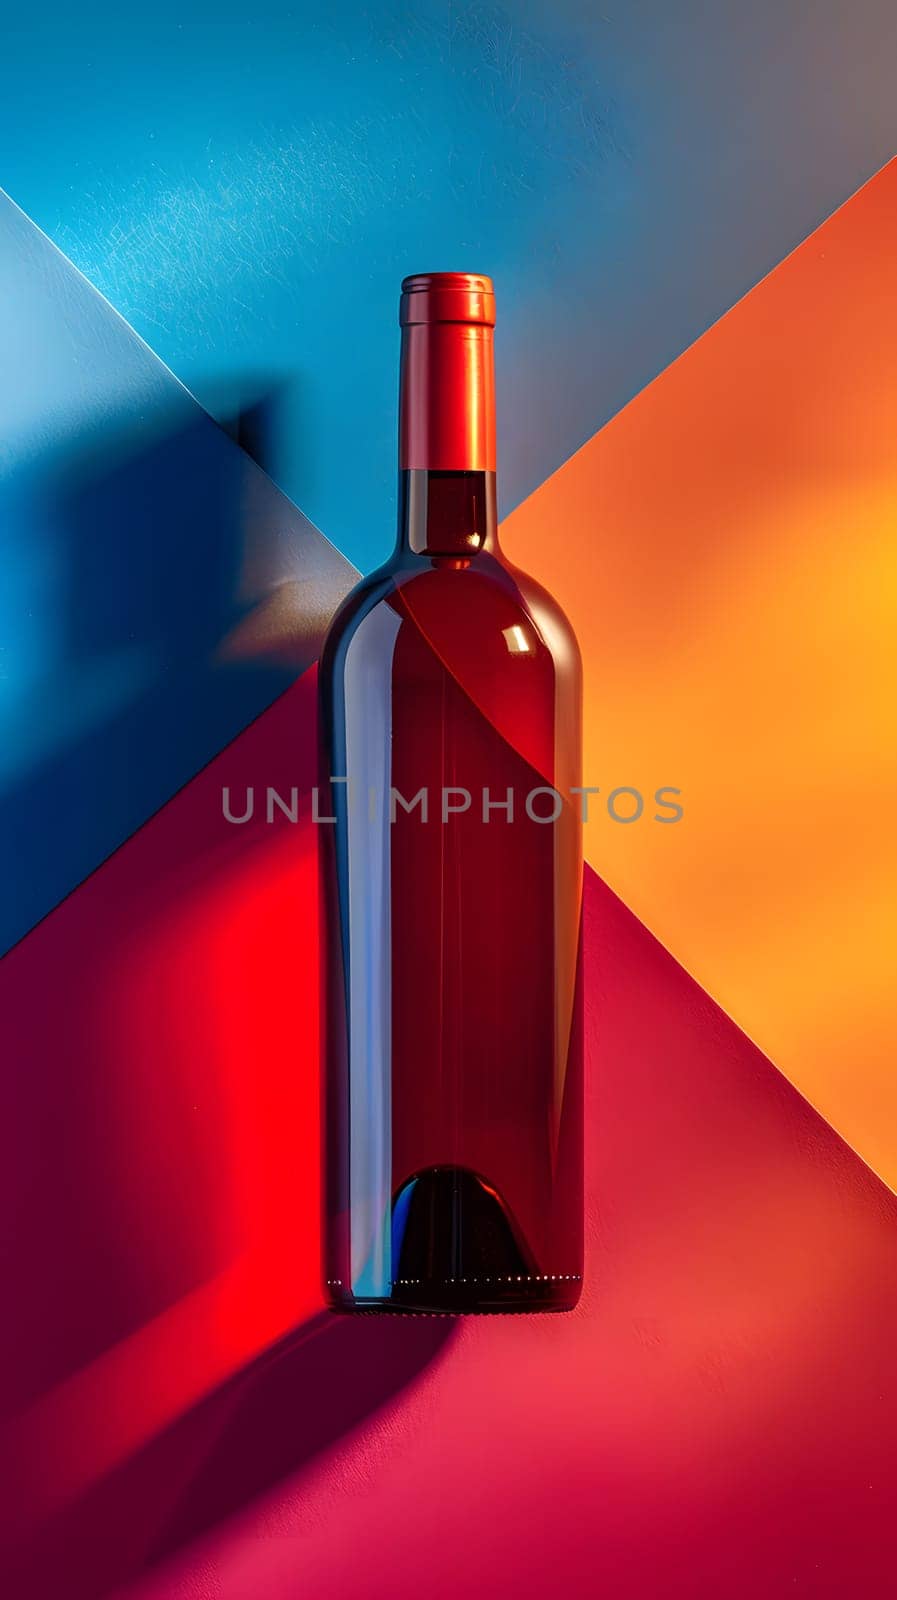 Glass bottle of wine rests on vibrant surface, showcasing rich tints and shades by Nadtochiy